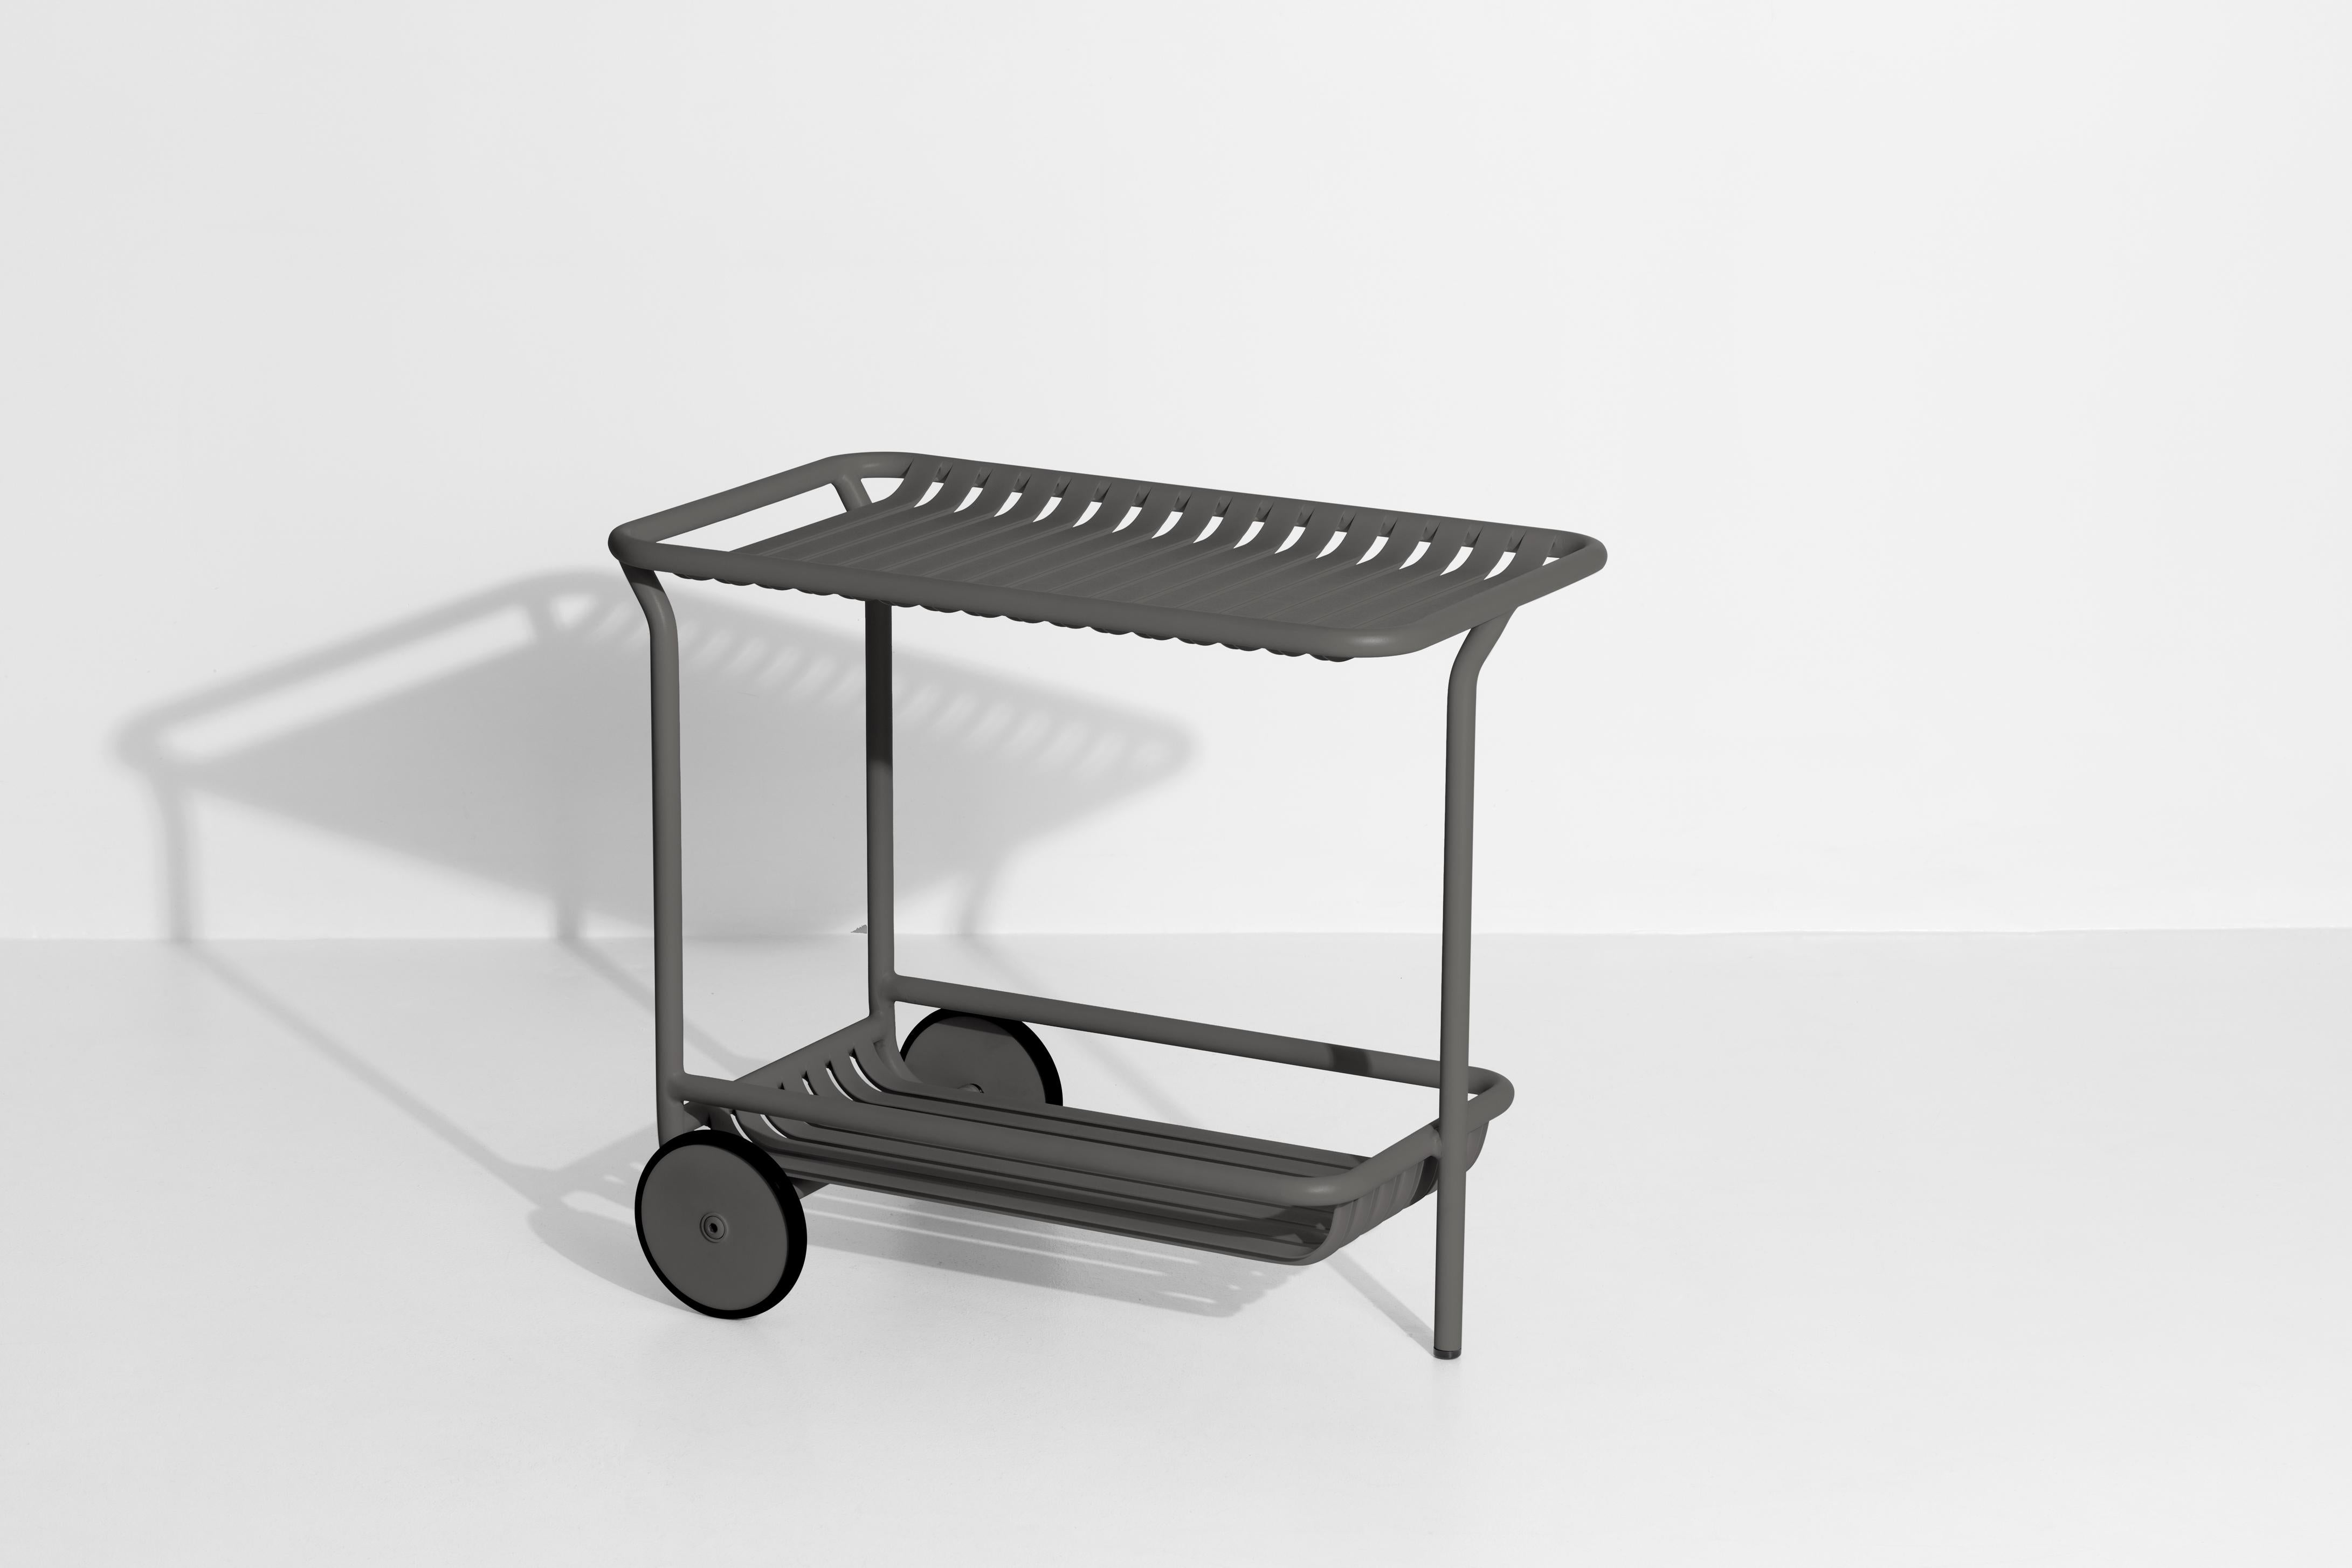 Petite Friture Week-End Trolley in Anthracite Aluminium by Studio BrichetZiegler, 2017

The week-end collection is a full range of outdoor furniture, in aluminium grained epoxy paint, matt finish, that includes 18 functions and 8 colours for the